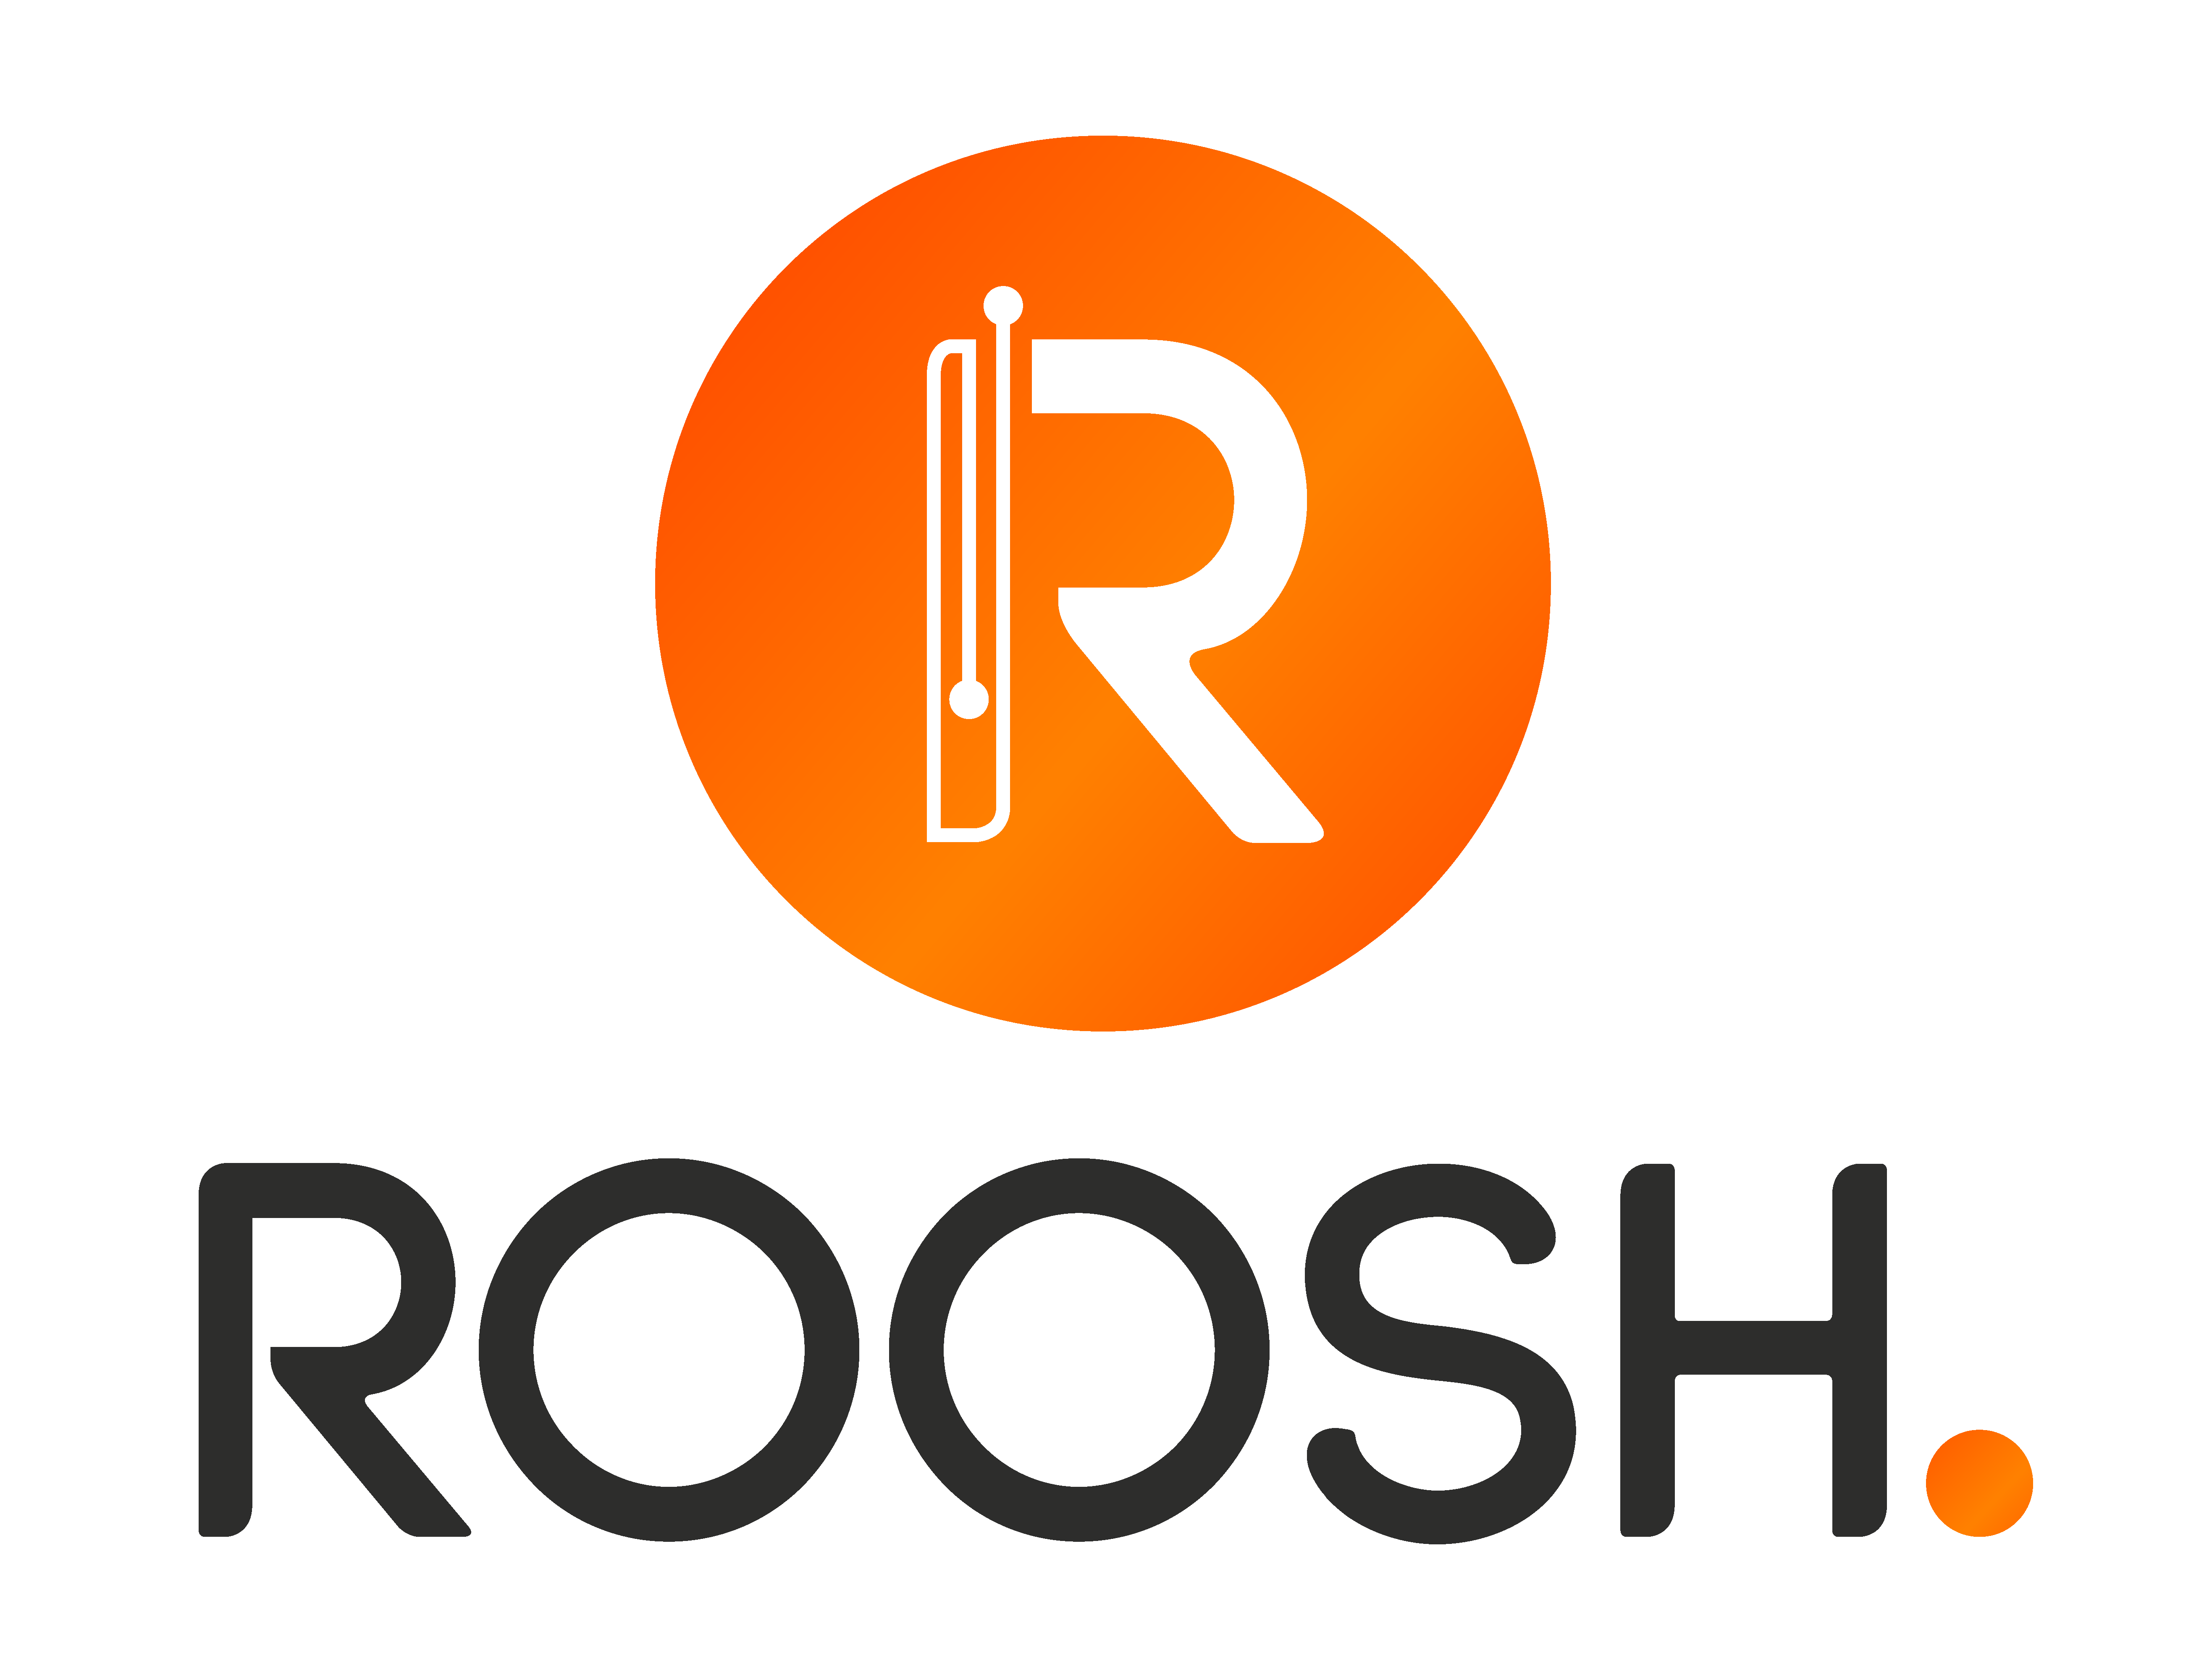 Welcome to the world of ROOSH.